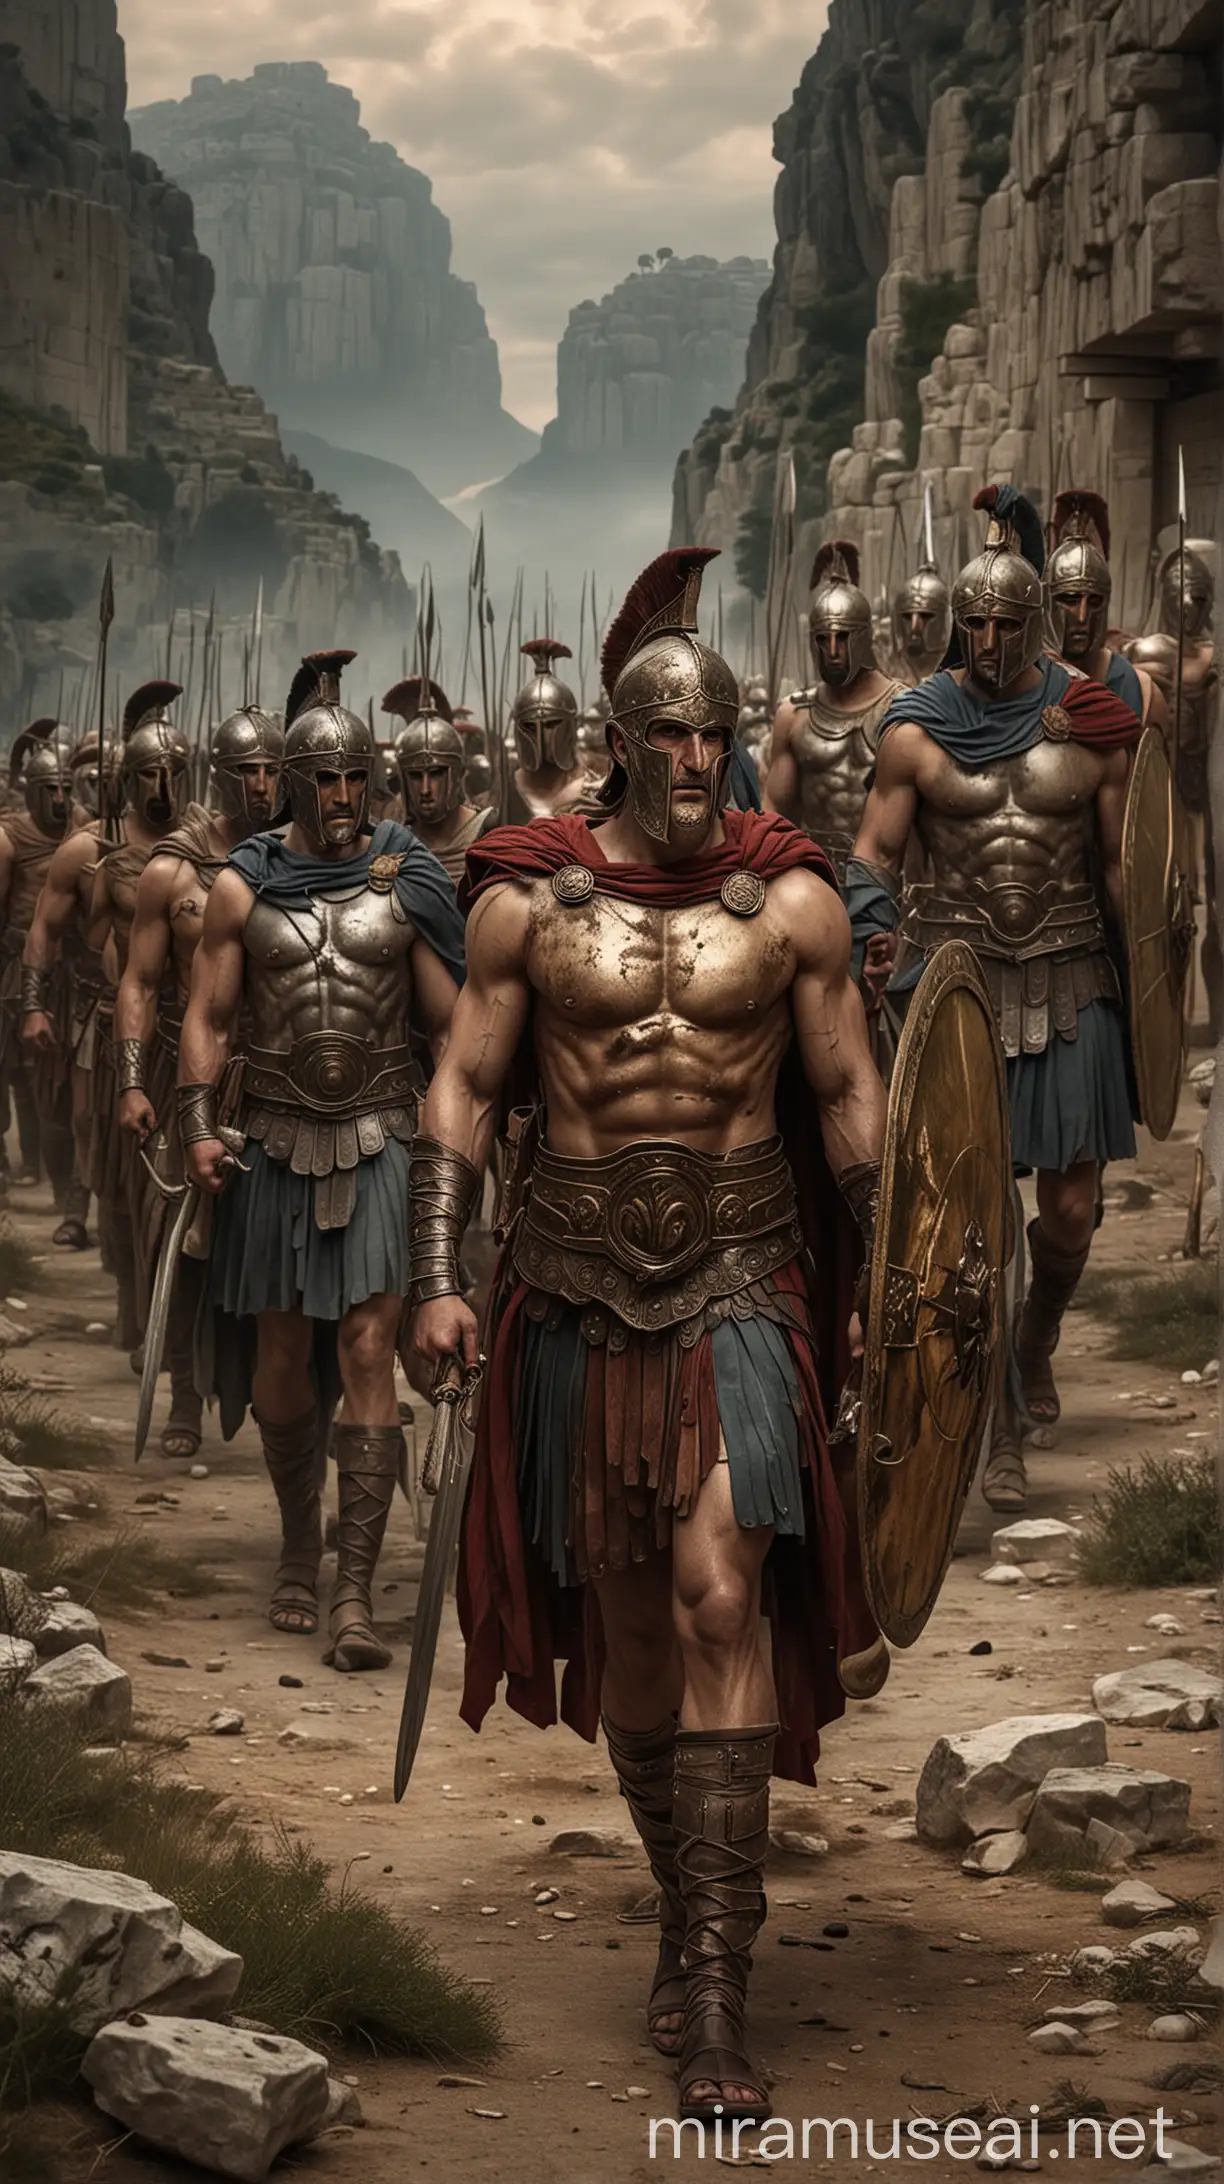 Use an image of a group of ancient Greek warriors, preferably in a dramatic and captivating setting. The image should convey a sense of mystery and intrigue about their legendary status.  hyper realistic